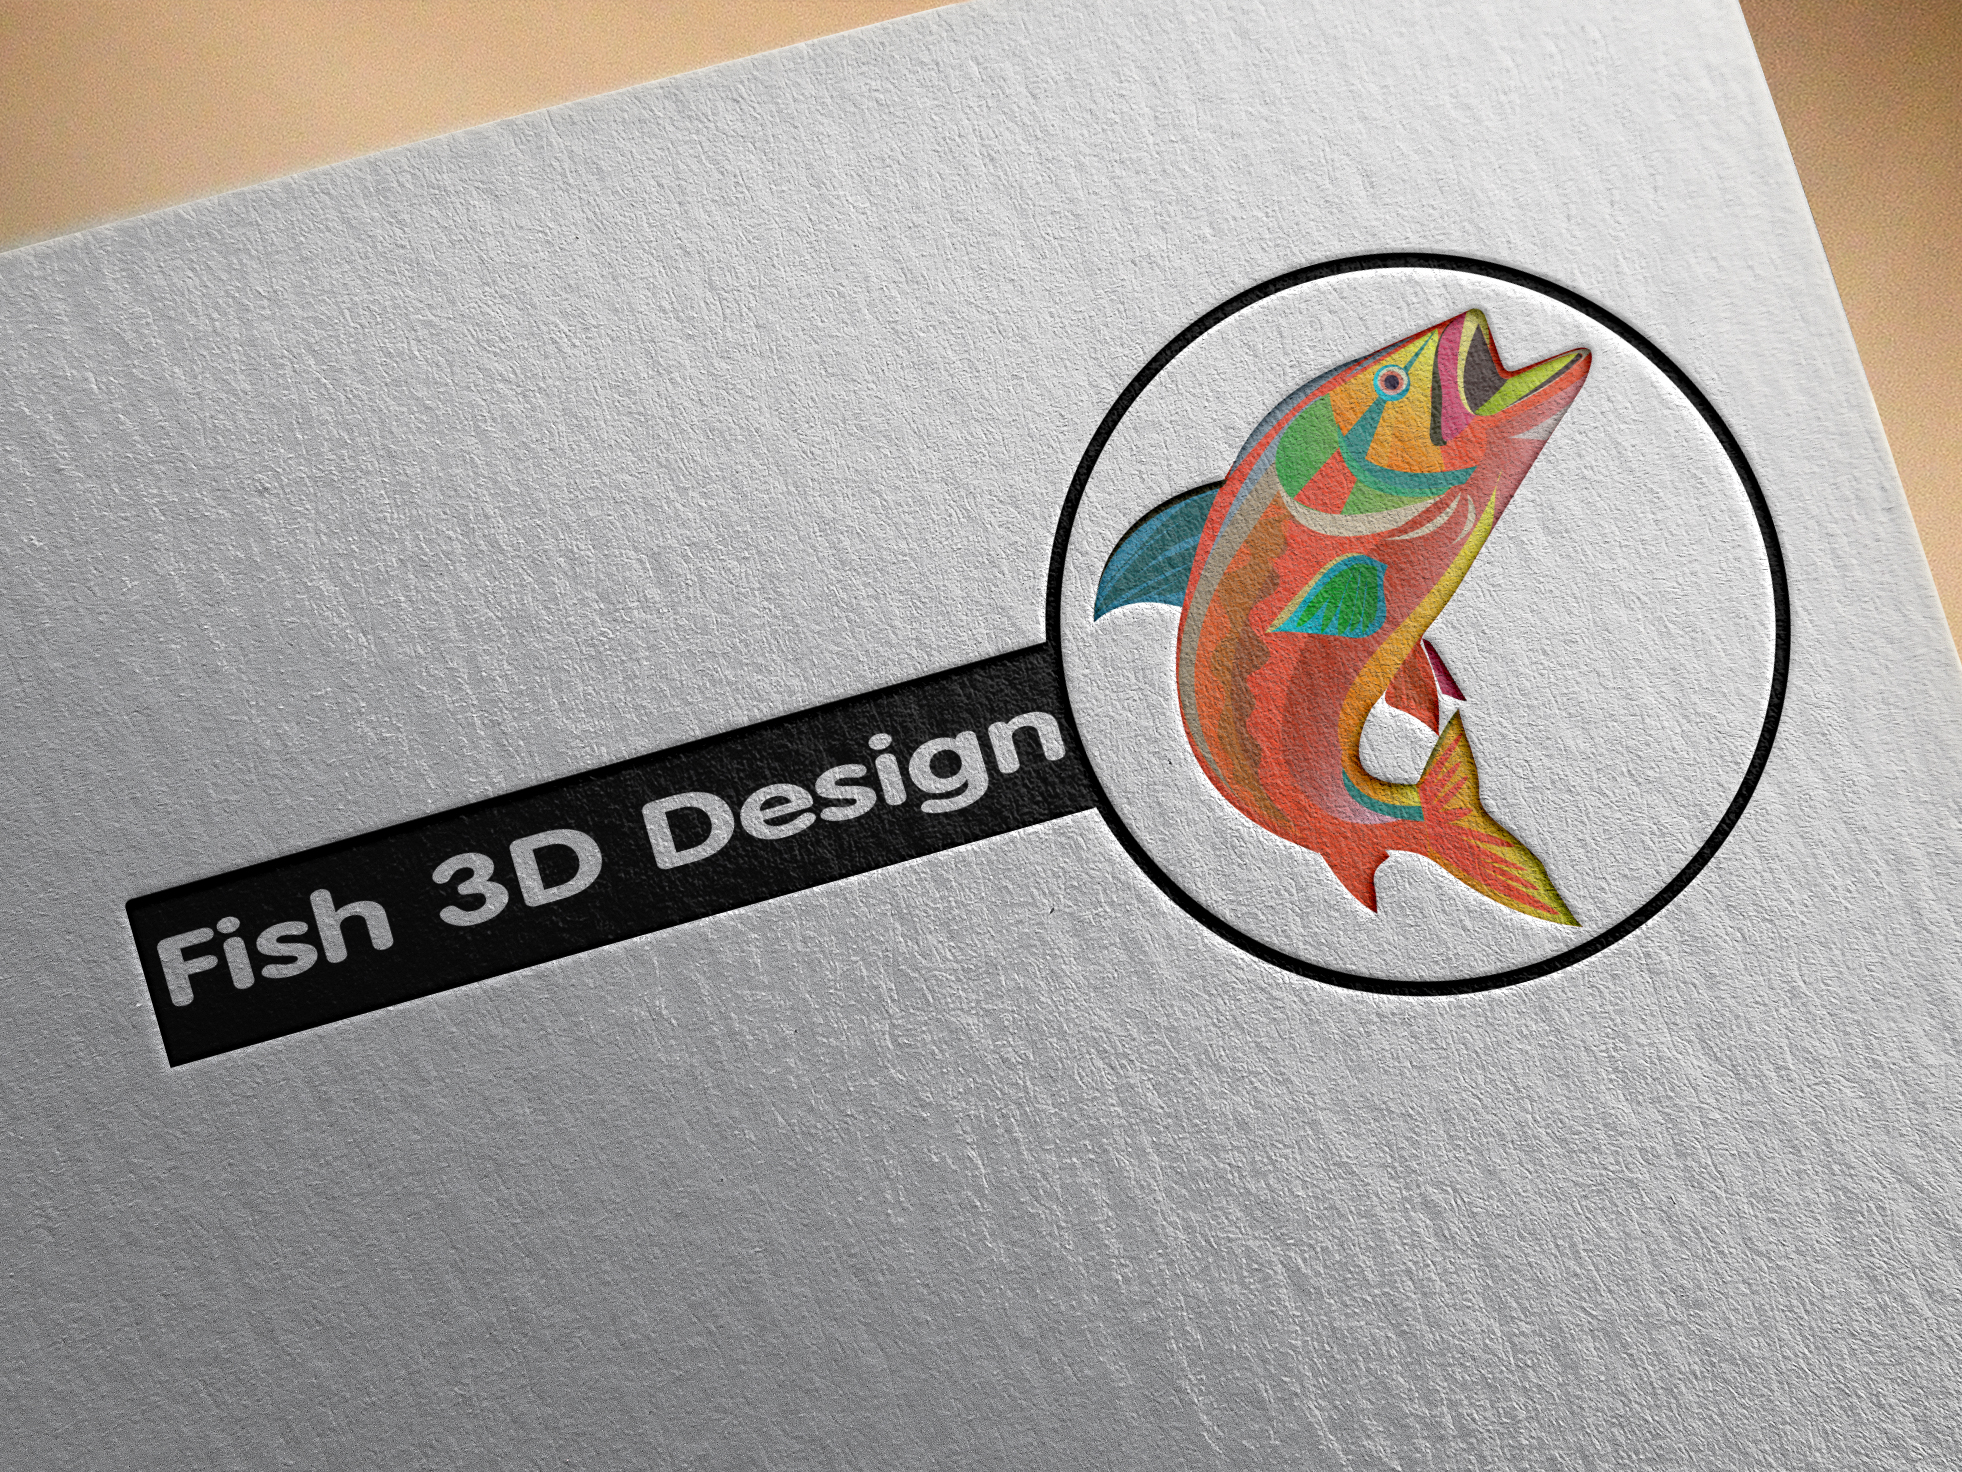 Download Fish Logo Mockup By Punedesign By Veer Hassan On Dribbble PSD Mockup Templates